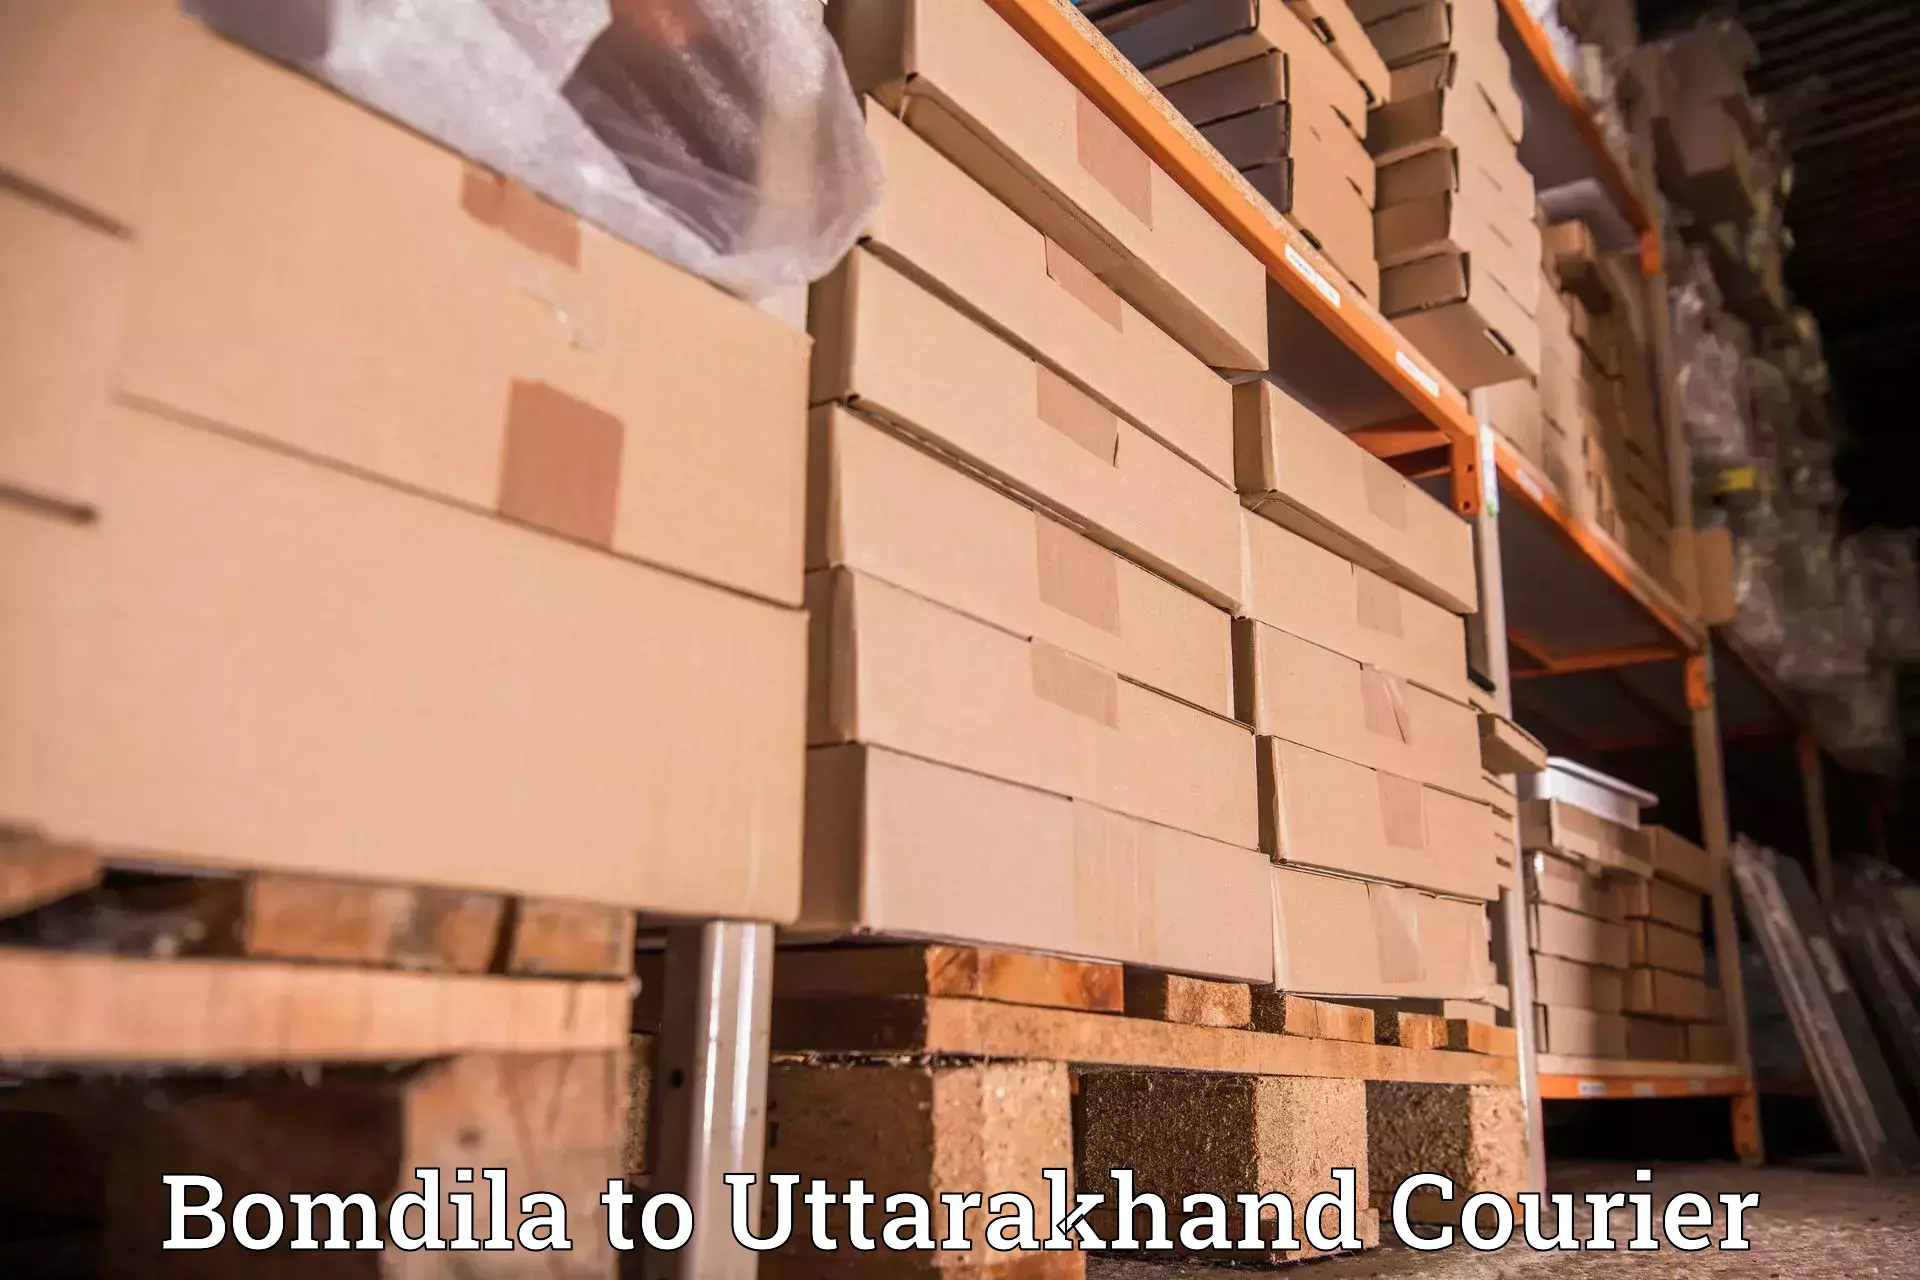 Supply chain delivery Bomdila to IIT Roorkee